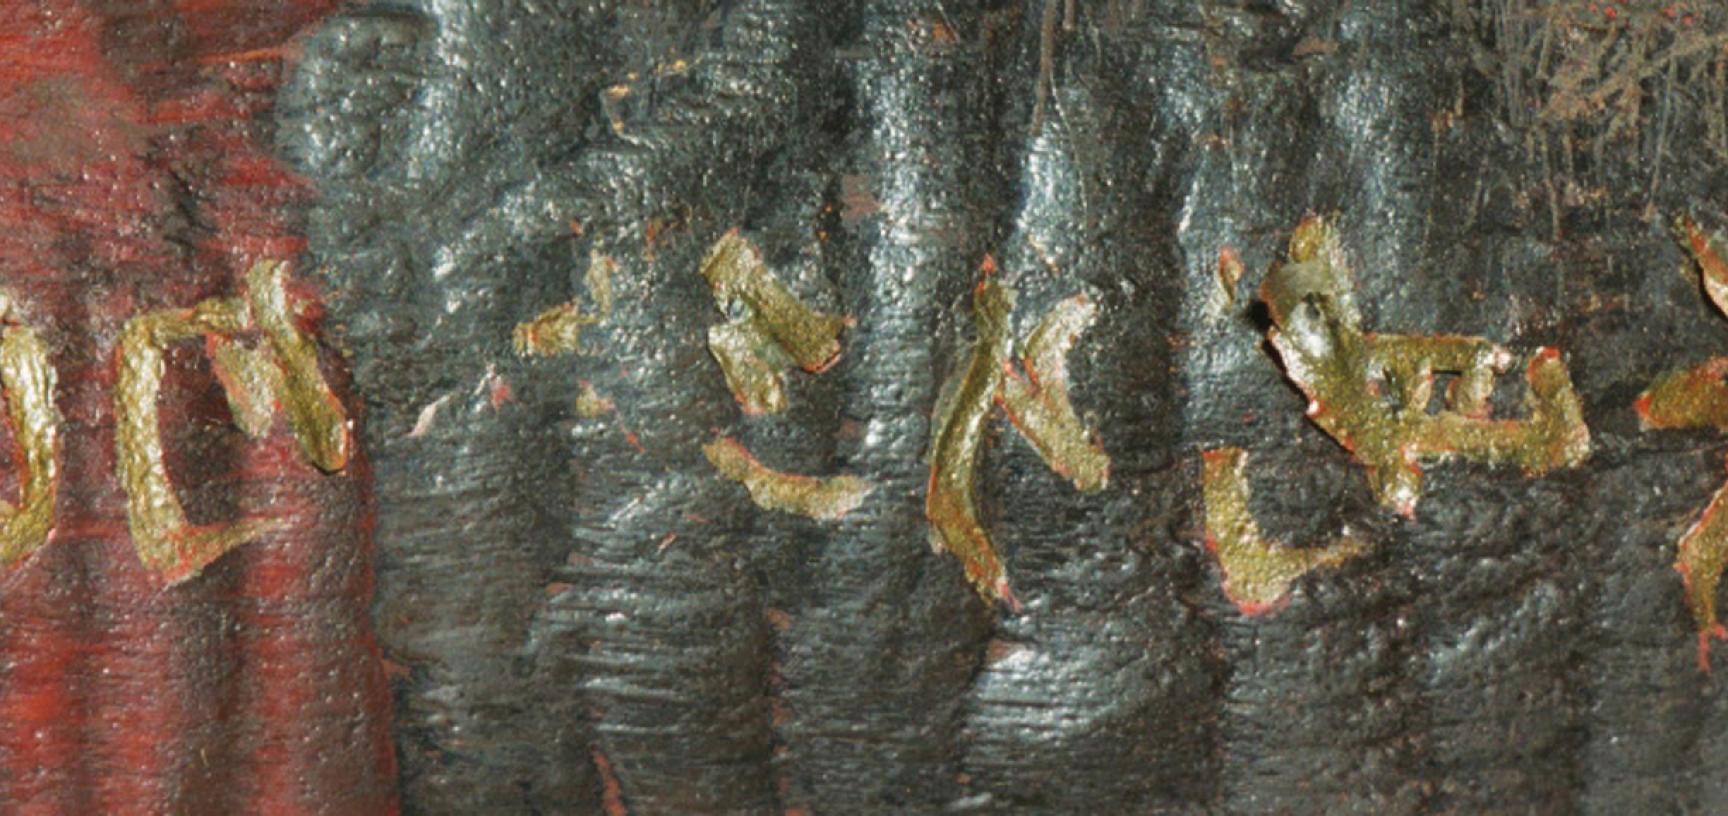 Signature before conservation